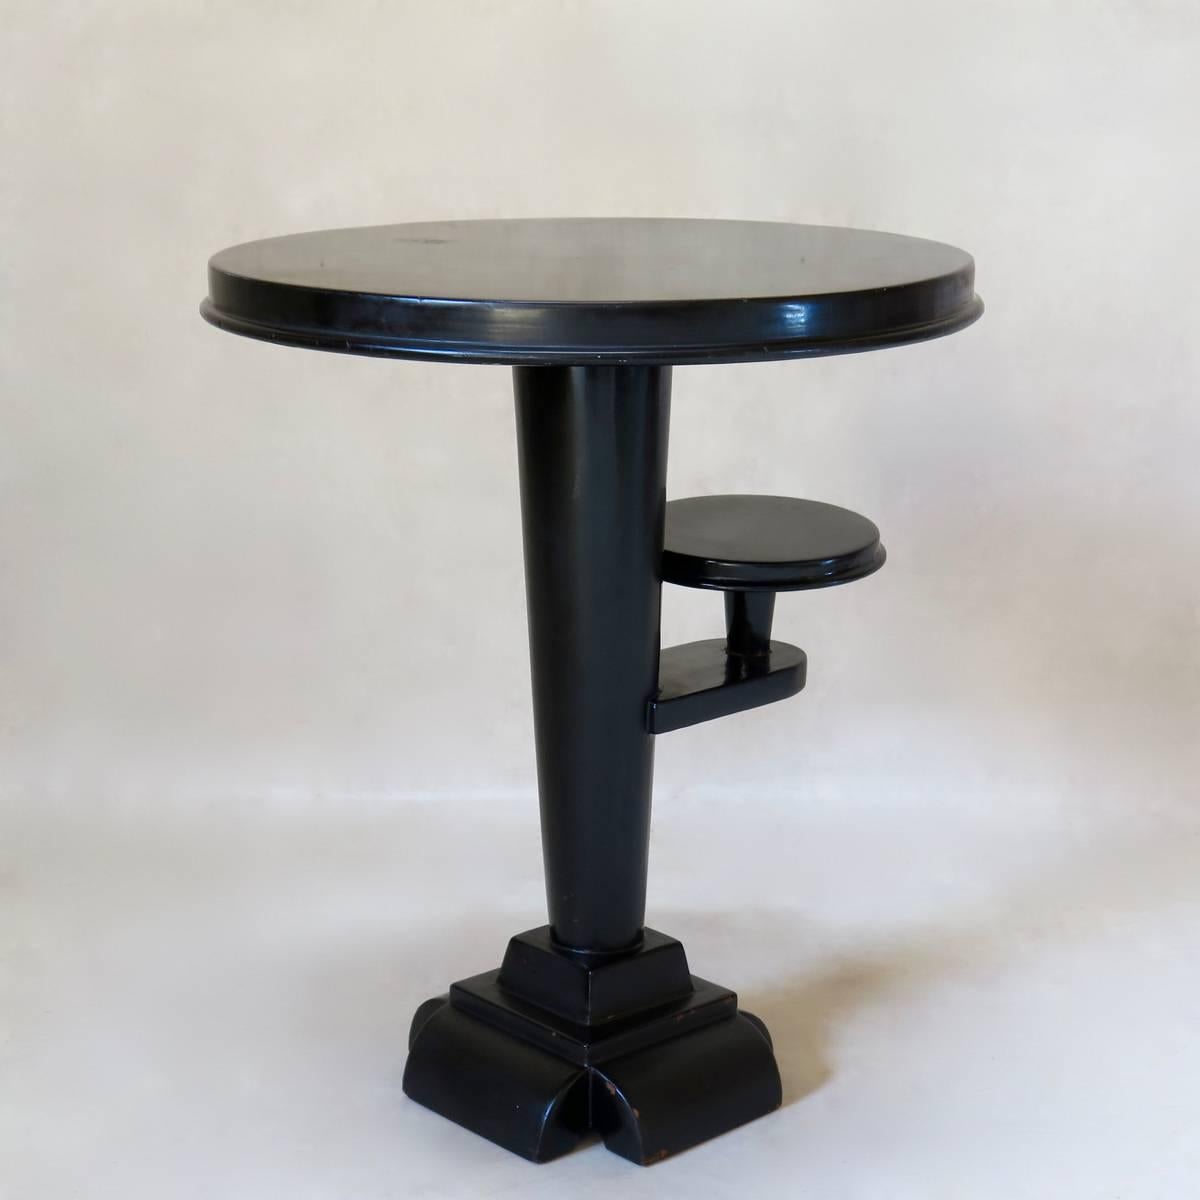 Elegant little side table with a smooth, shiny, black lacquered finish. Conical stem, tapering down to an unusual, stacked foot. Additional little shelf mid-way up the stem. Delicate and refined.